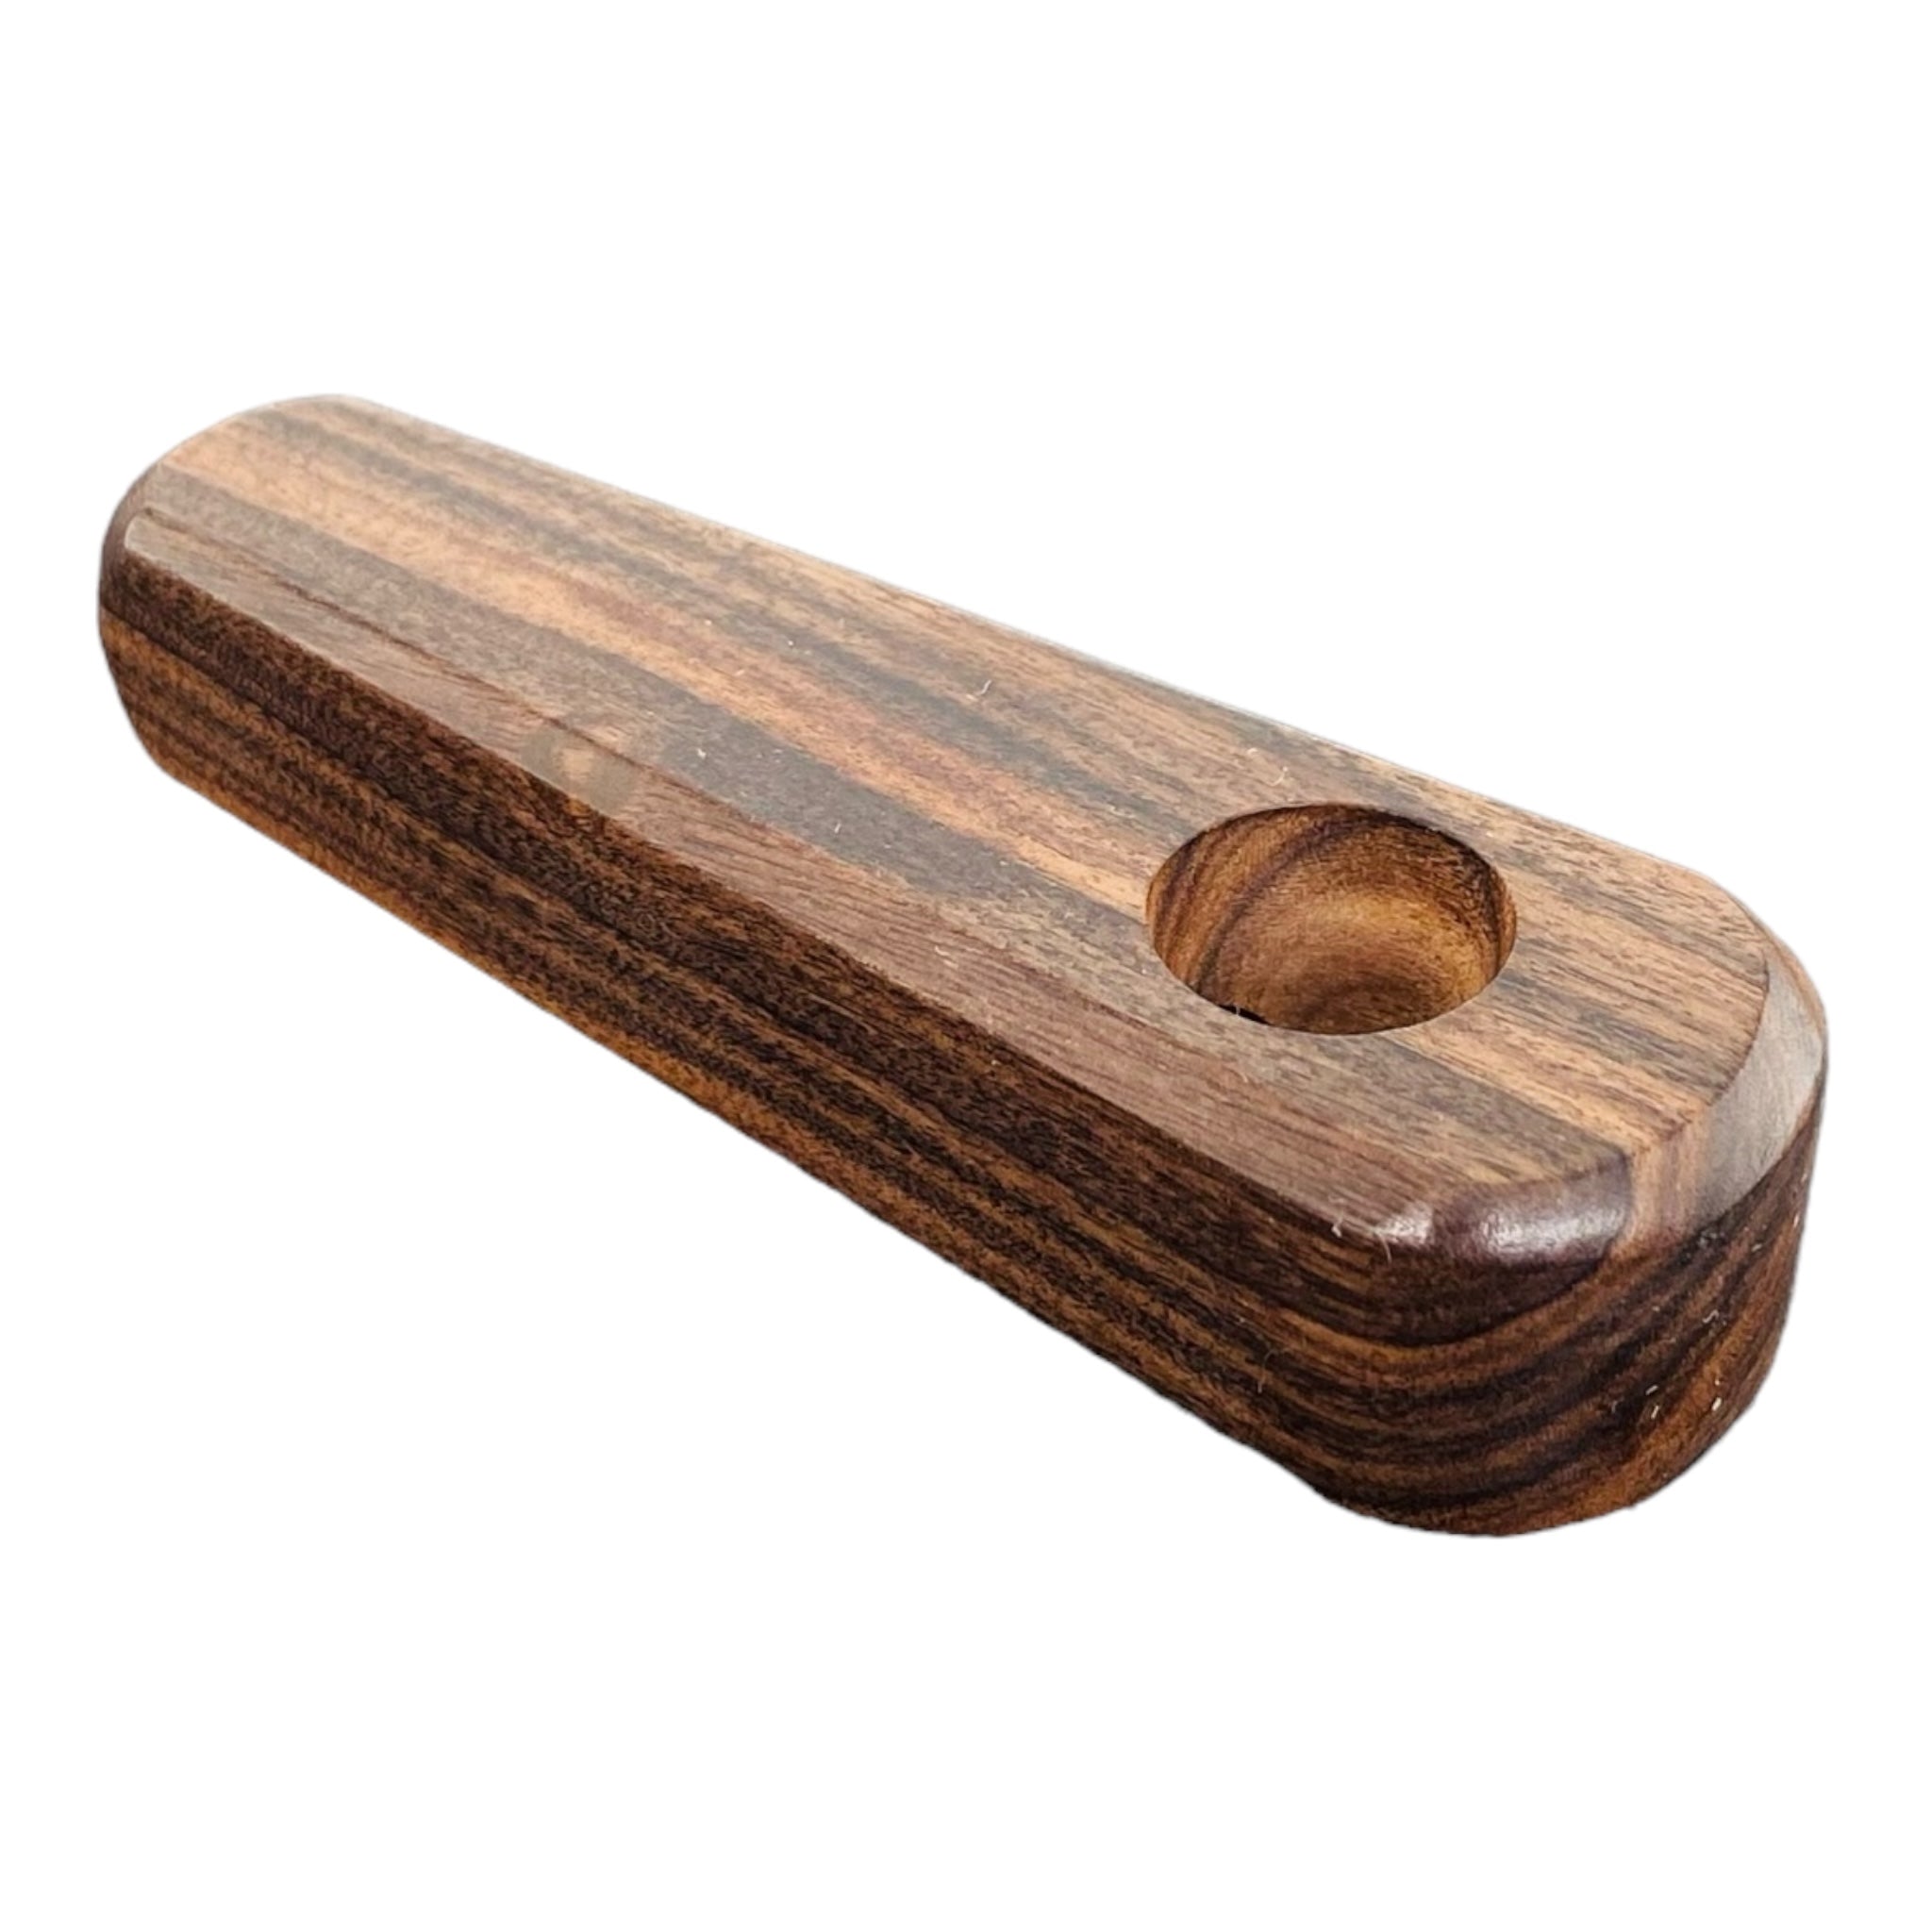 small pocket sized hardwood hand pipe for weed or tobacco